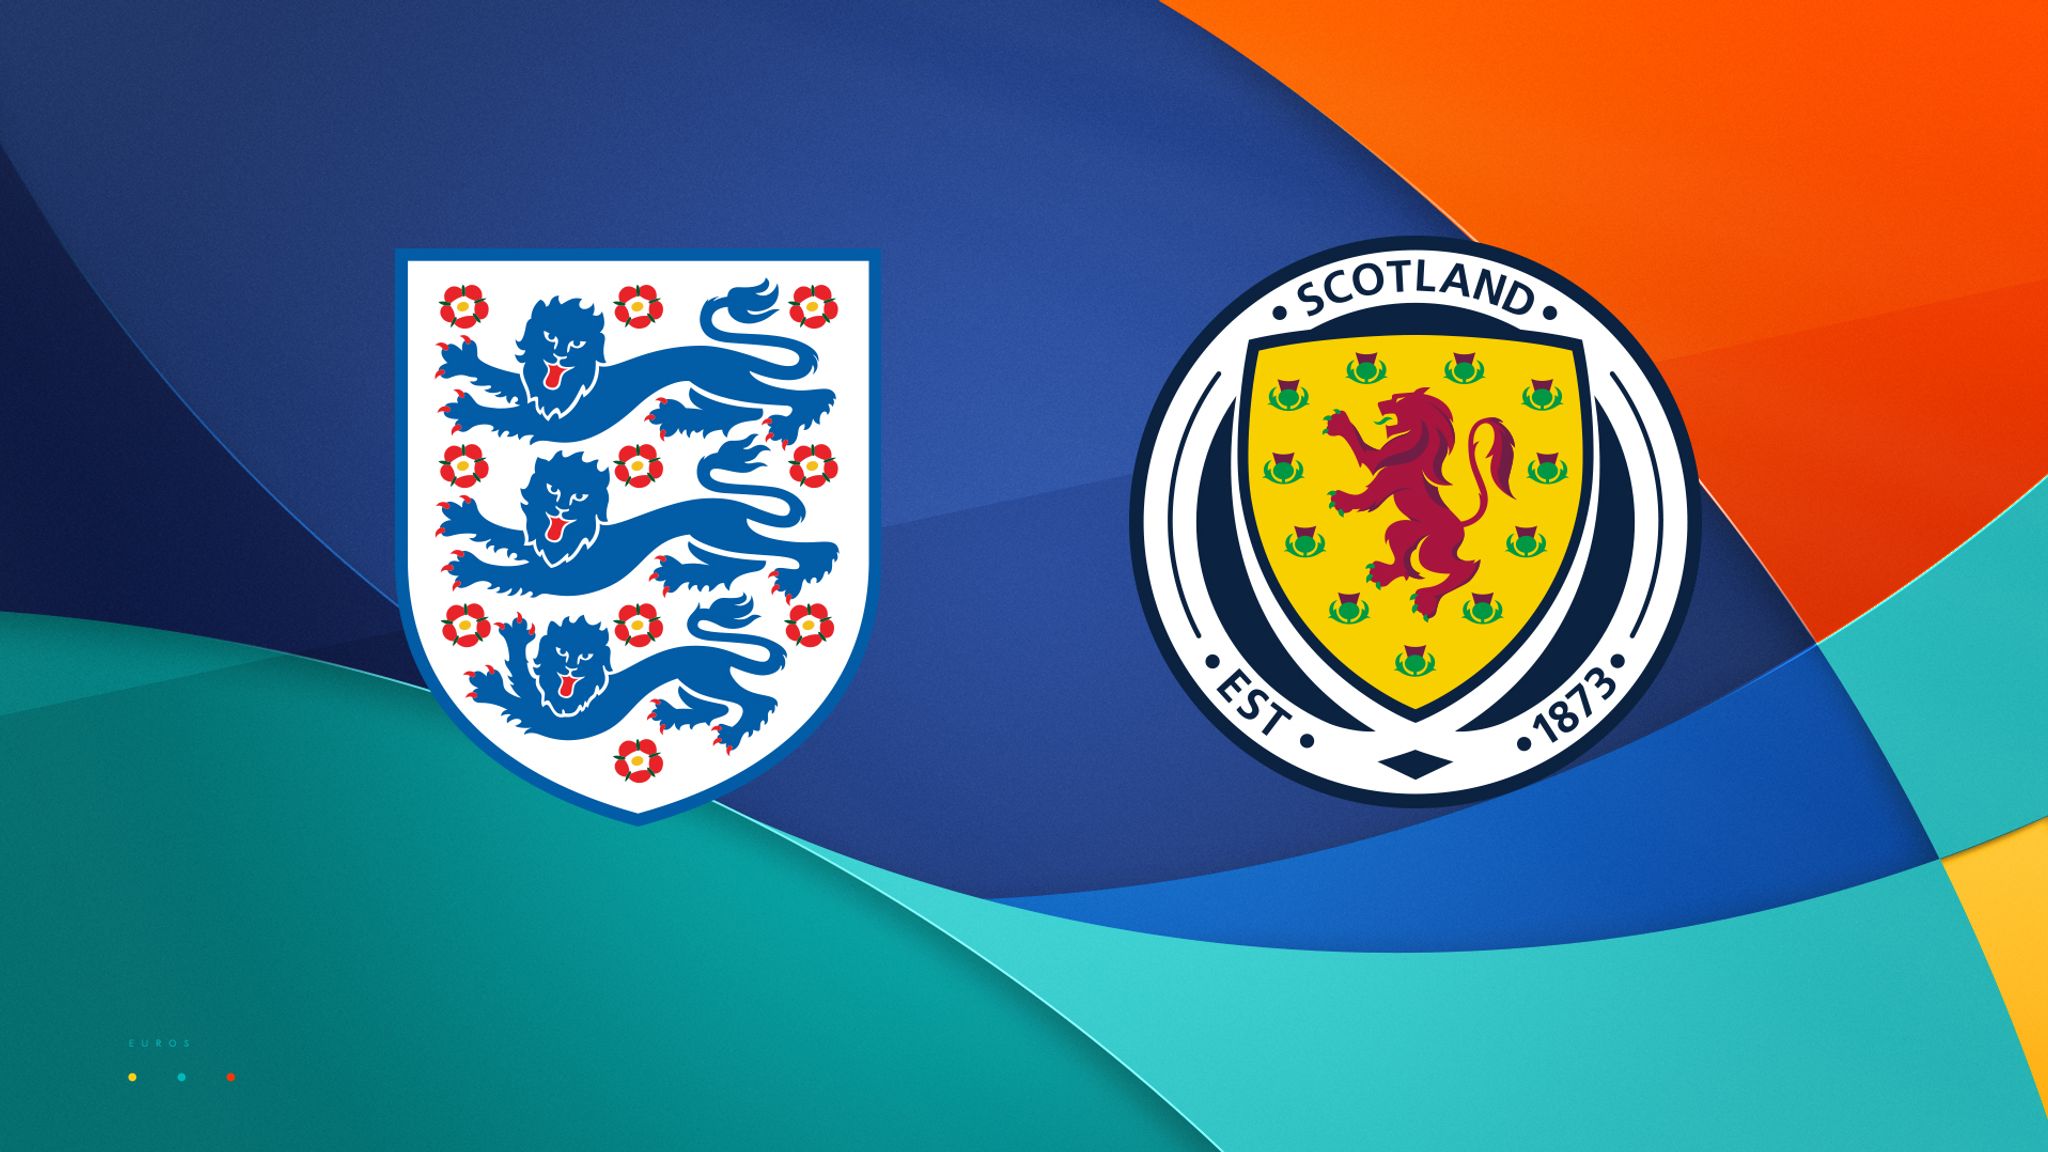 Euro 2020: England vs Scotland - follow live in-play action and stats | Football News | Sky Sports